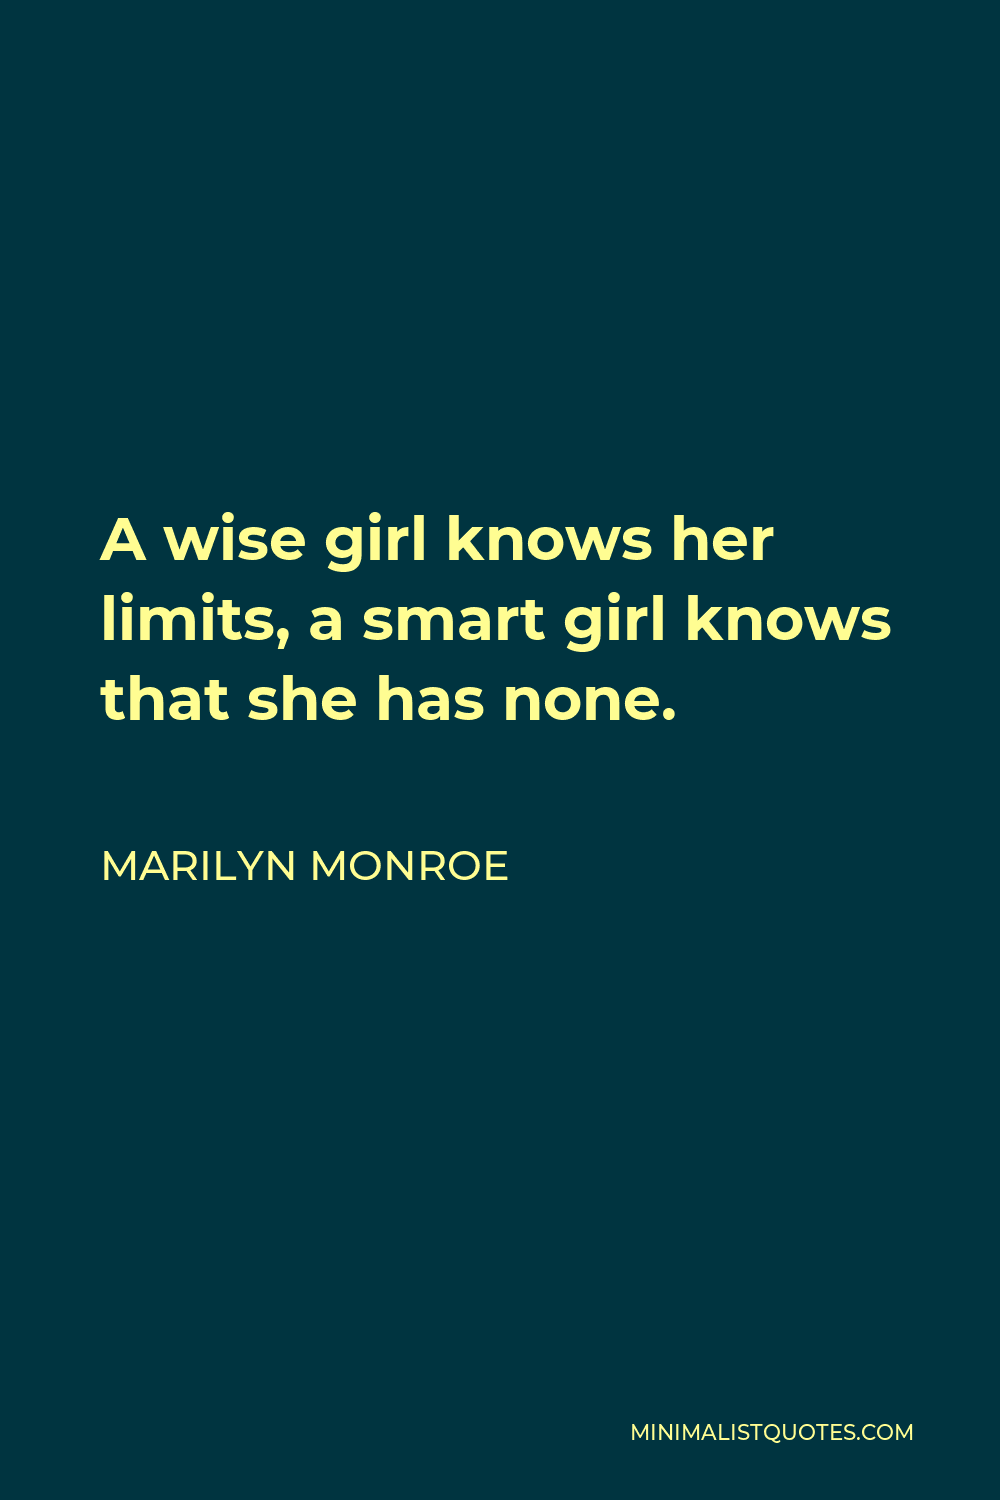 Marilyn Monroe Quote - A wise girl knows her limits, a smart girl knows that she has none.